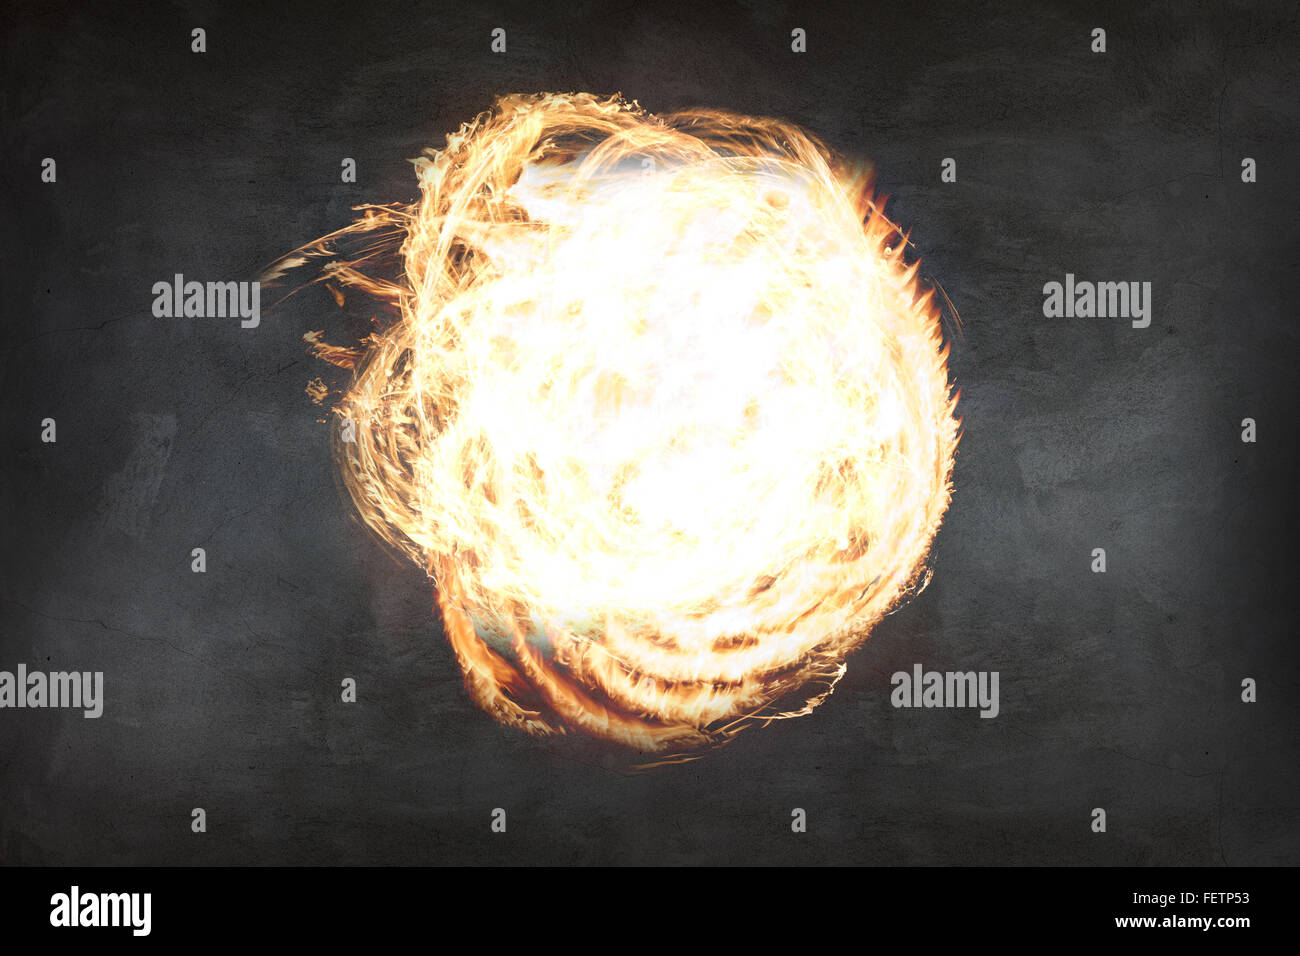 Abstract fire ball Stock Photo